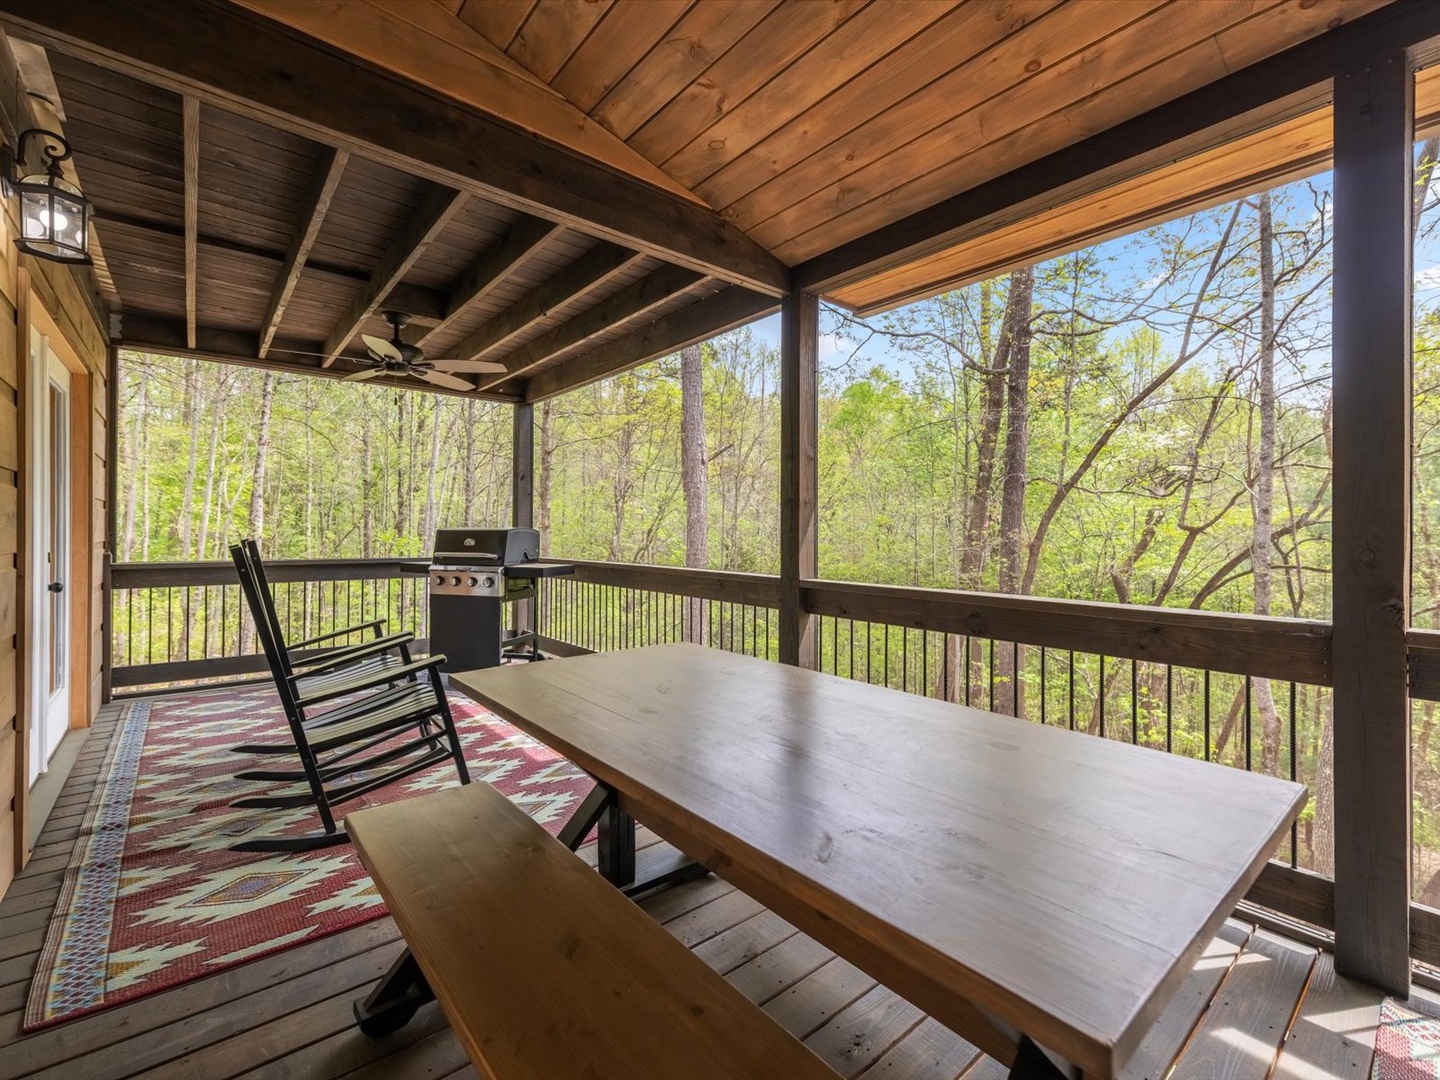 Fern Creek Hollow Lodge - Entry Level Deck Dining Area